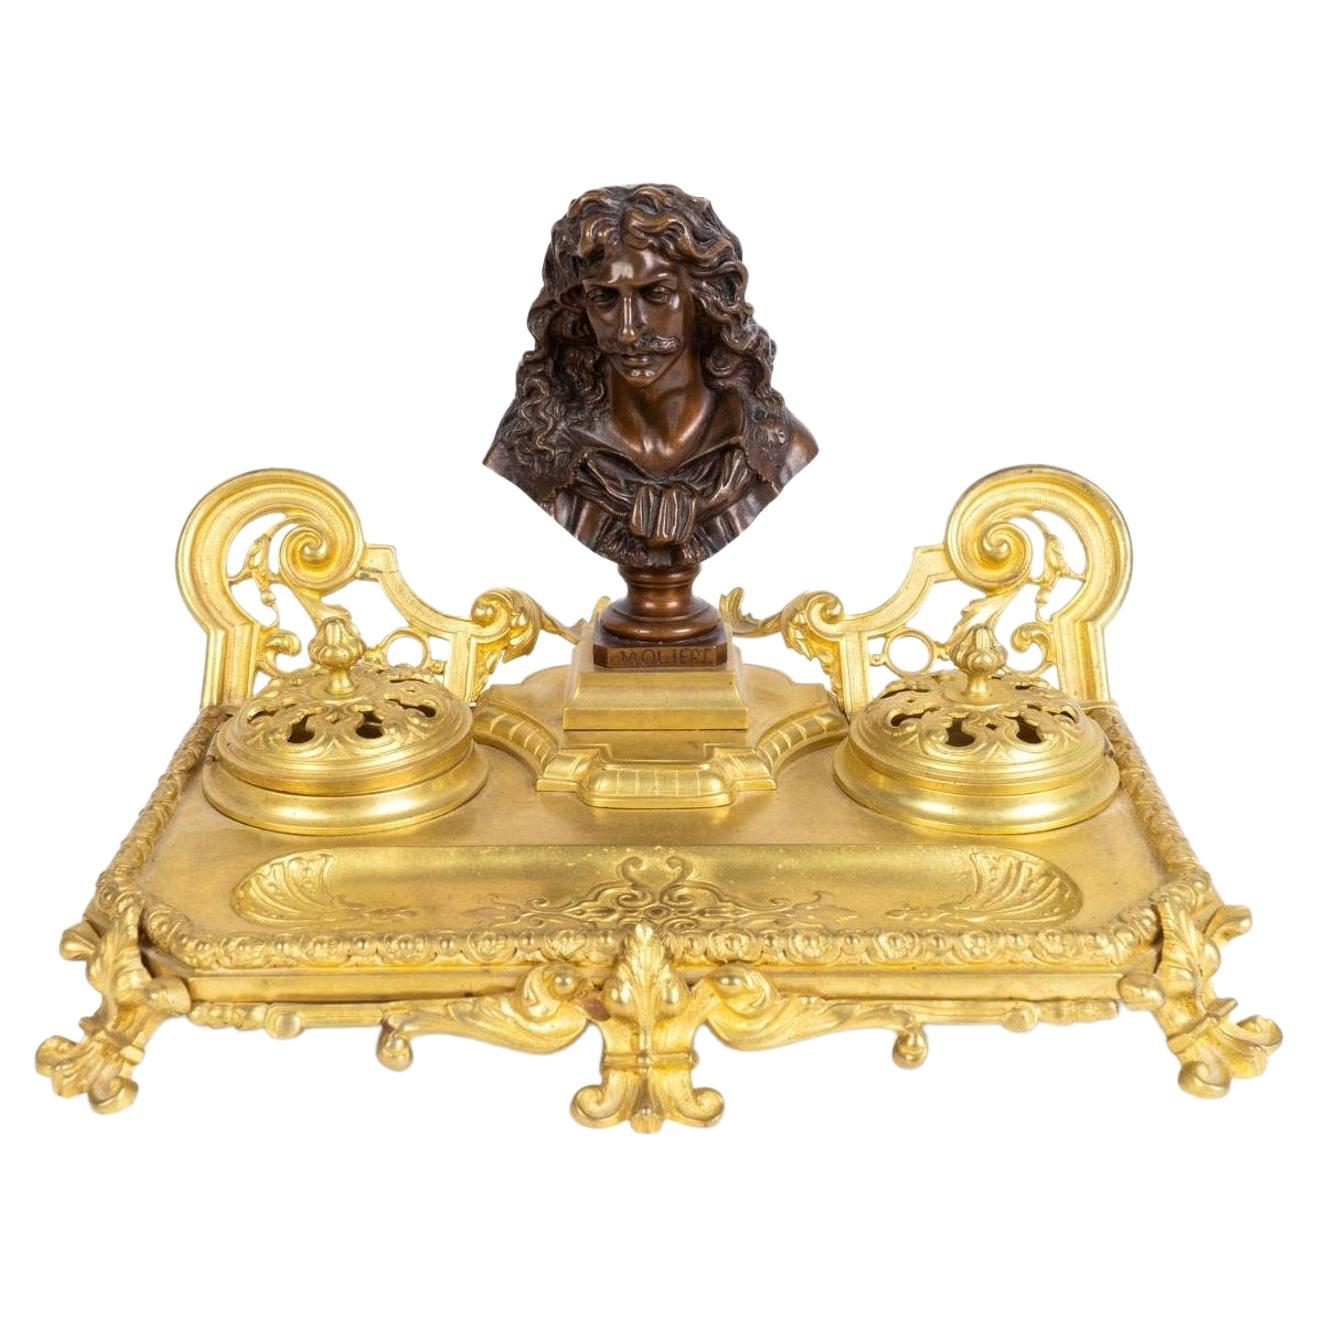 Antique French Gilt Bronze Encrier Inkwell Desk Stand, Signed JF